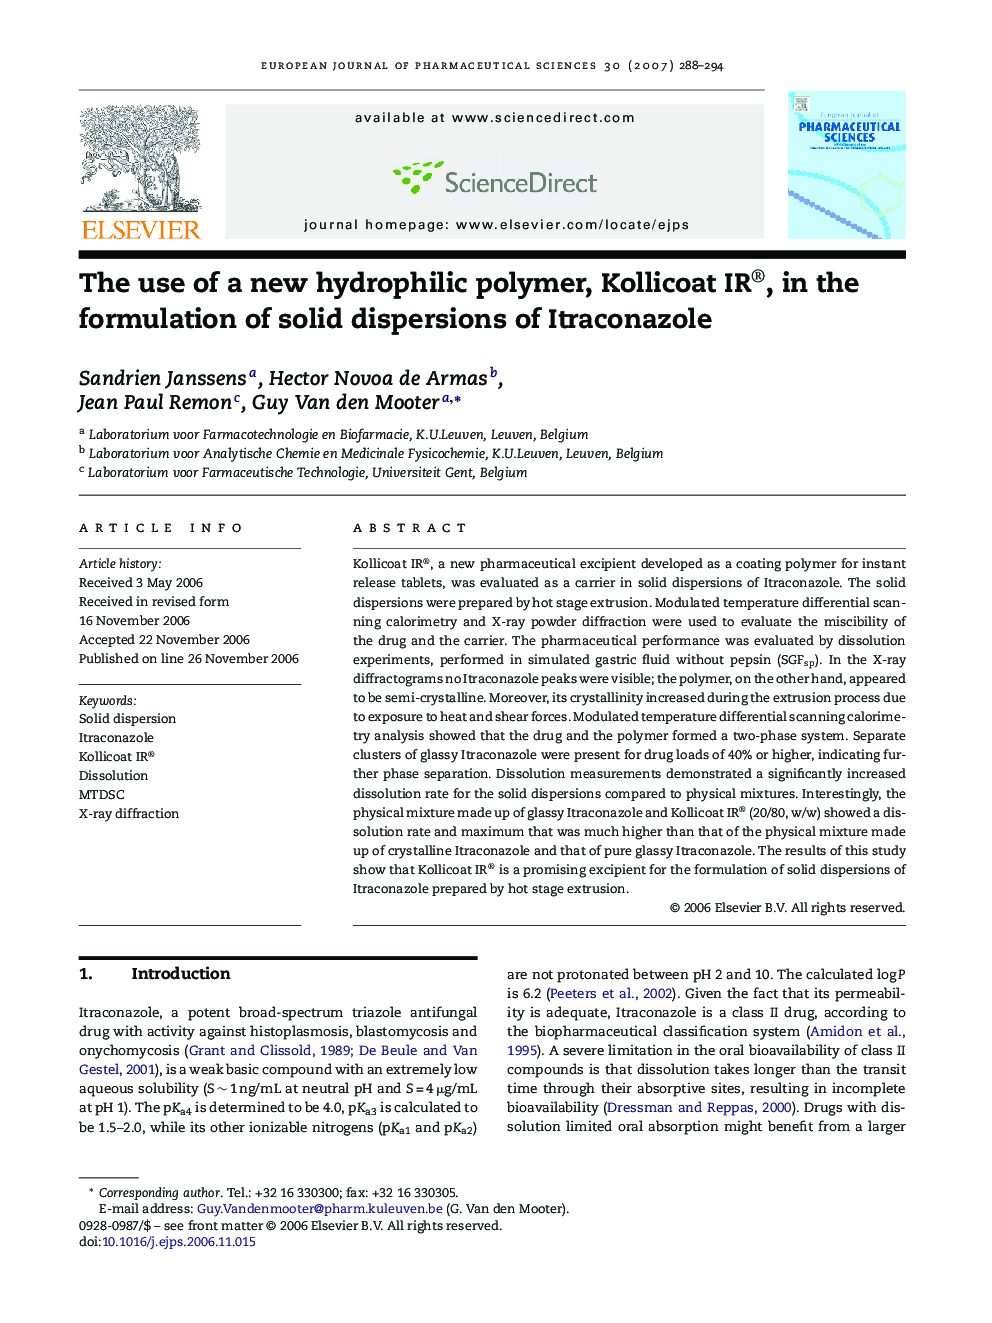 The use of a new hydrophilic polymer, Kollicoat IR®, in the formulation of solid dispersions of Itraconazole